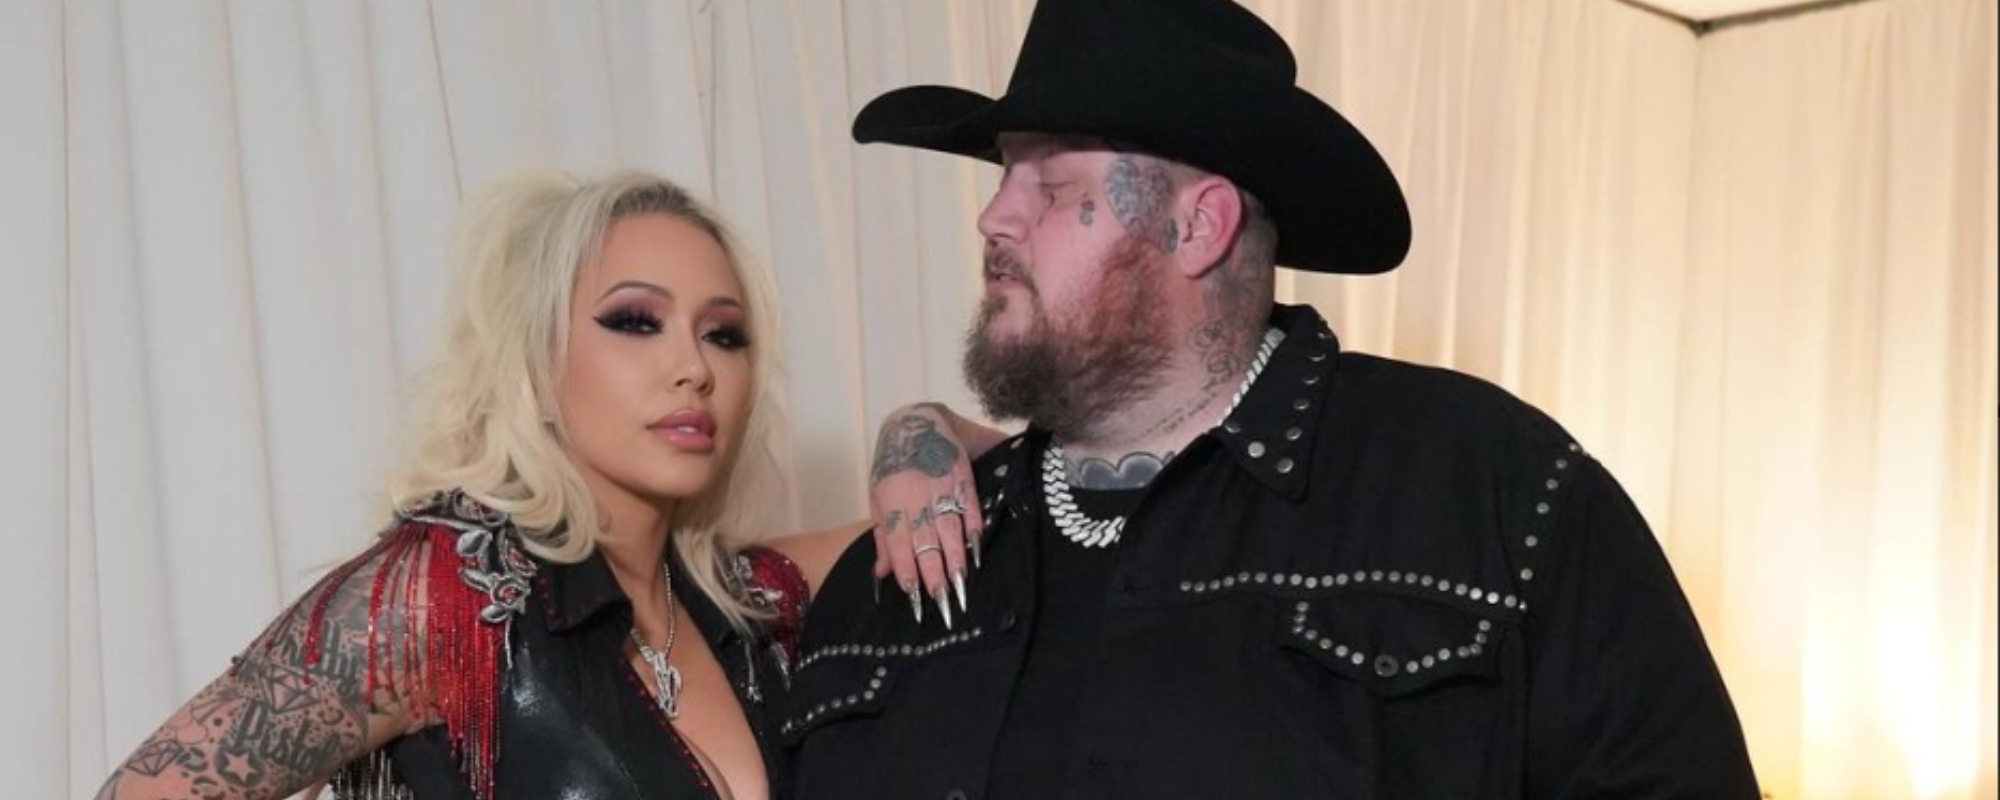 Bunnie Xo Reveals Final Verdict on if She Got Jelly Roll Banned From the Houston Rodeo